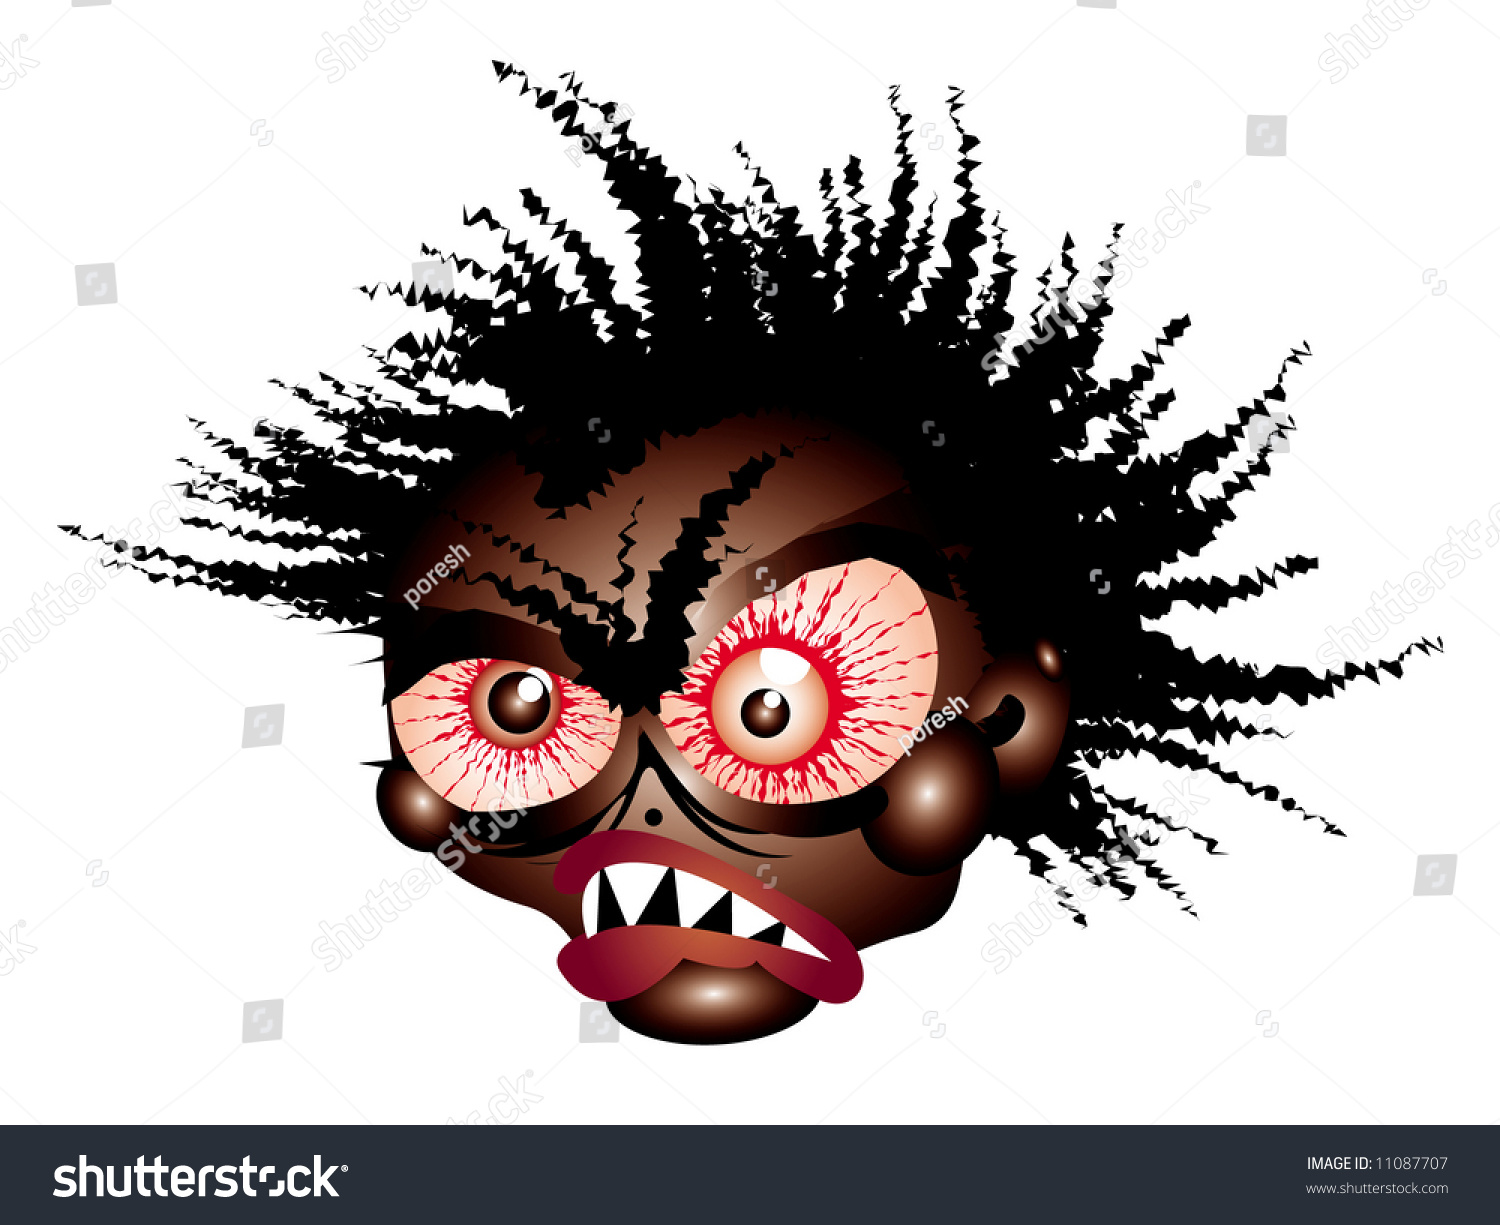 Mad Ugly Face Vector Illustration Stock Illustration 11087707 Vector clip art illustration with simple gradients. https www shutterstock com image illustration mad ugly face vector illustration 11087707